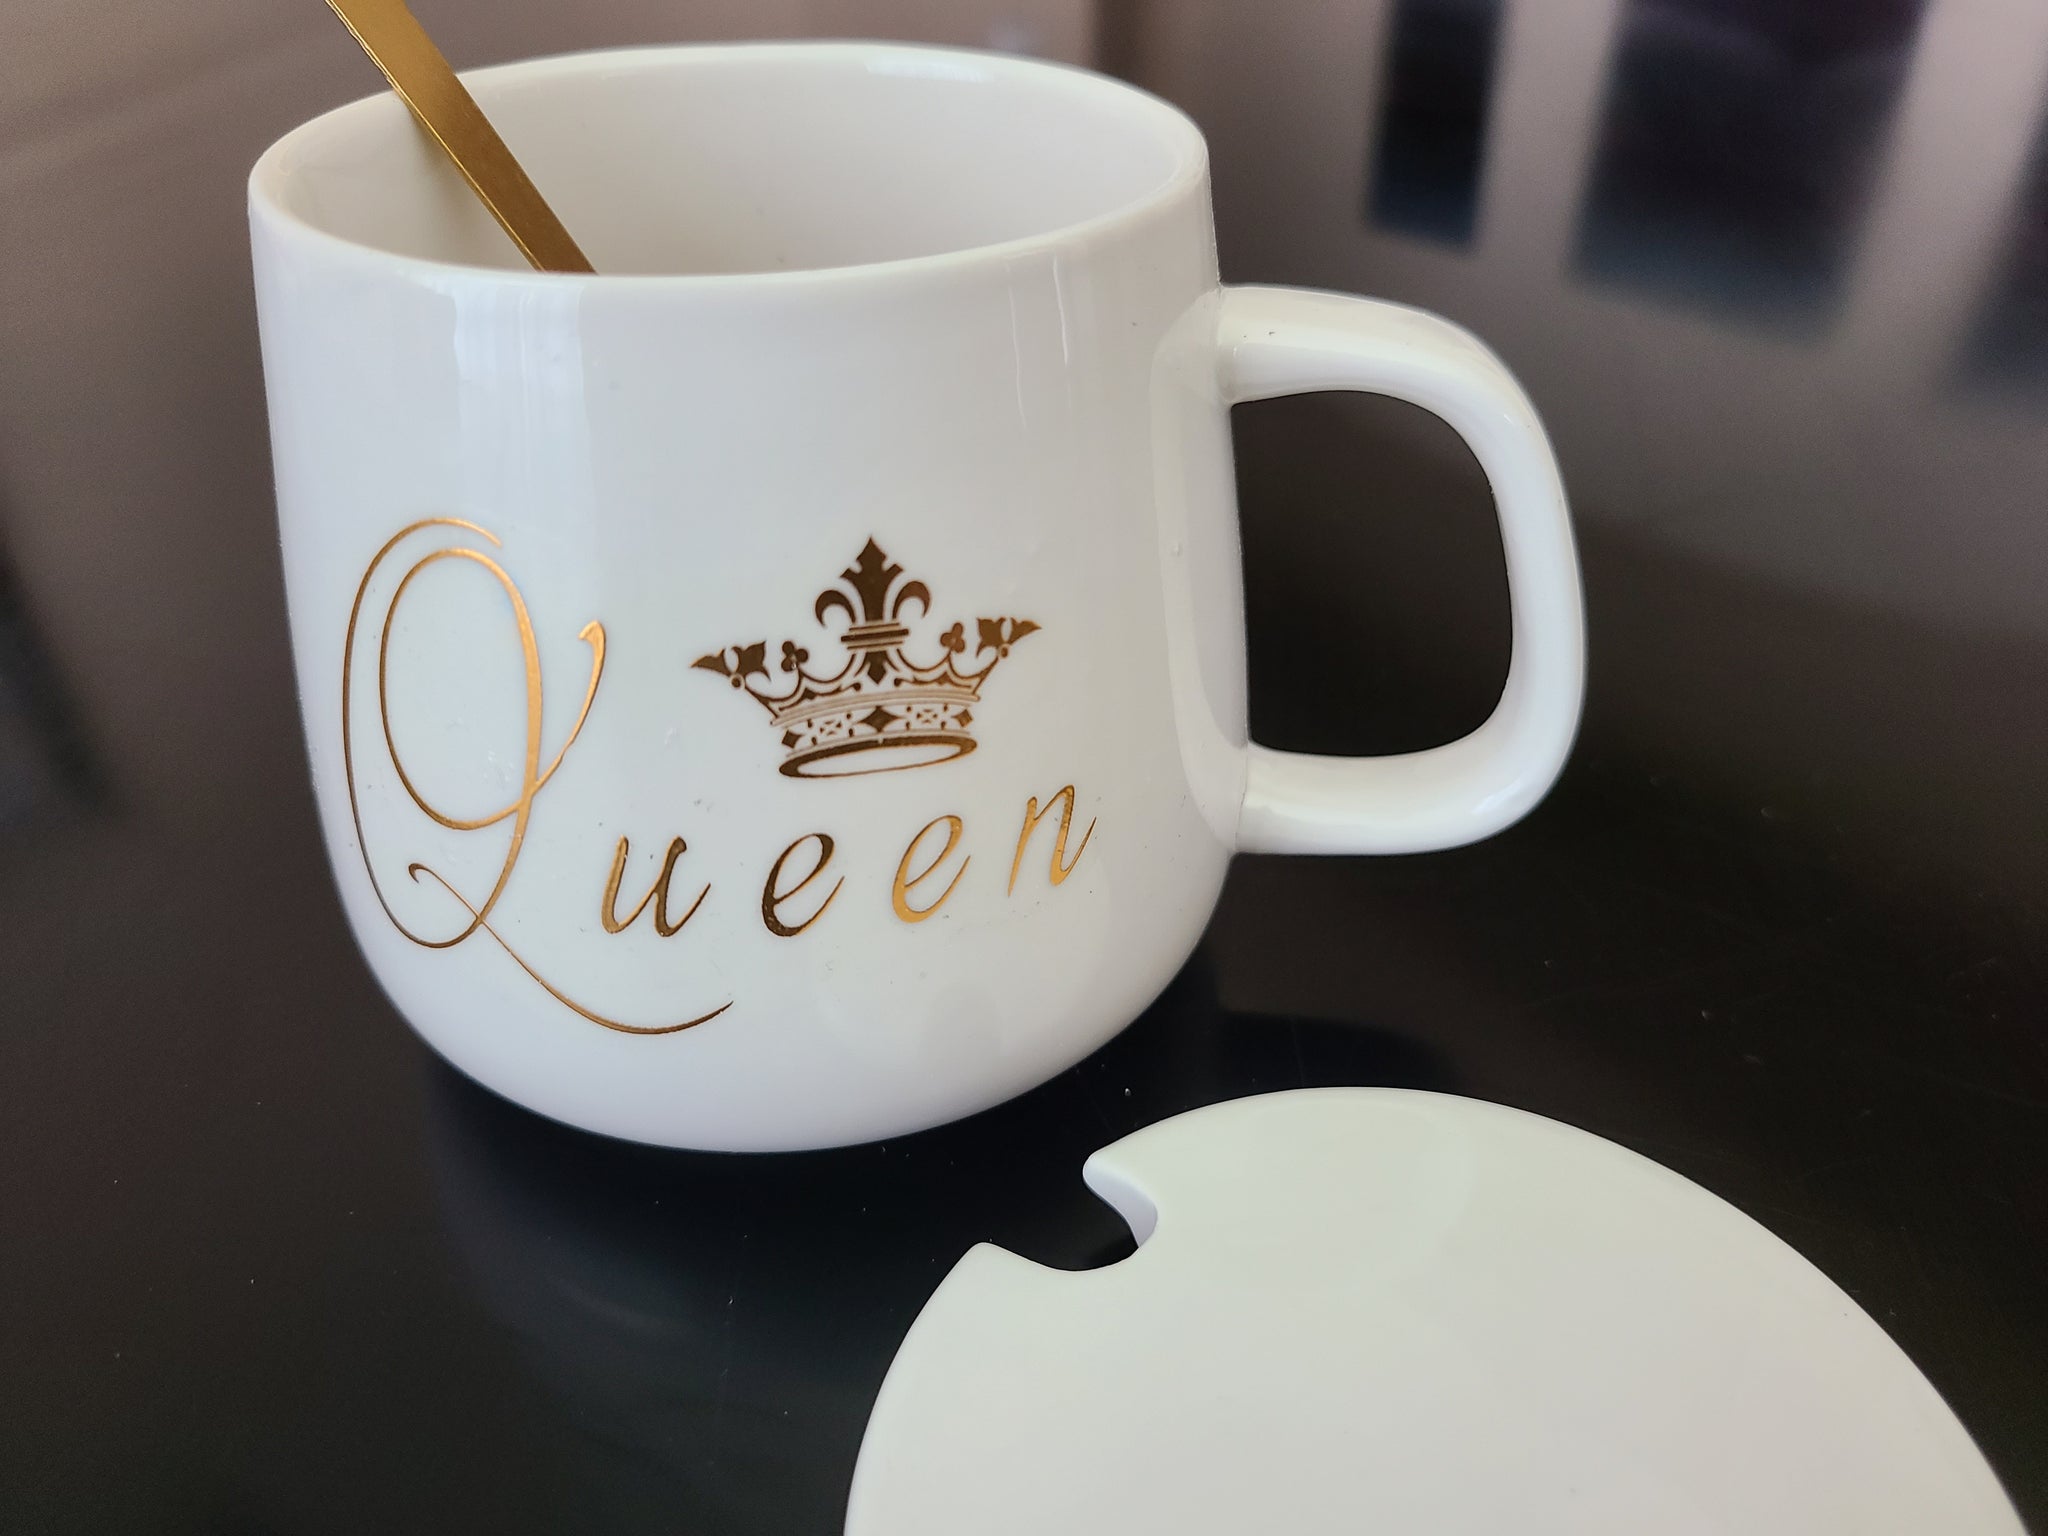 The queen of king coffee